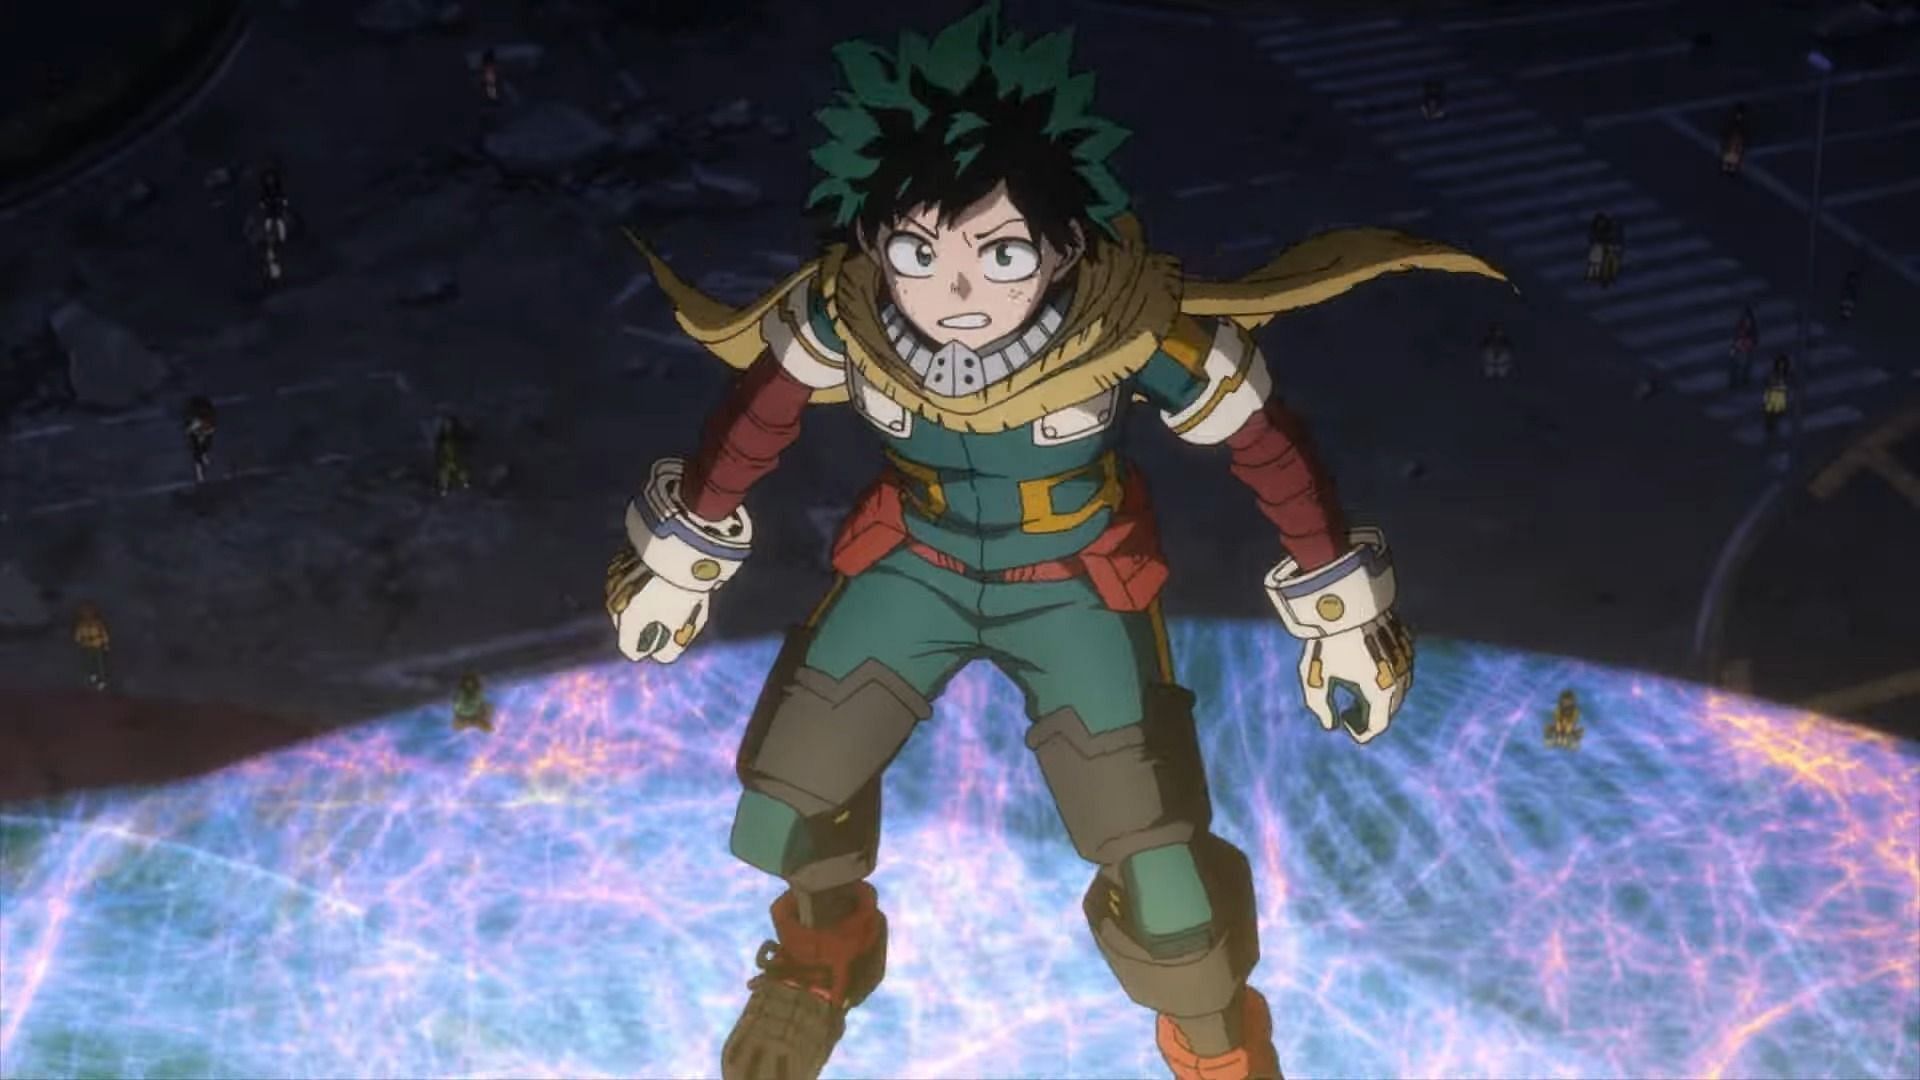 New My Hero Academia film reveals title, release date, and more in new PV (Image via BONES)